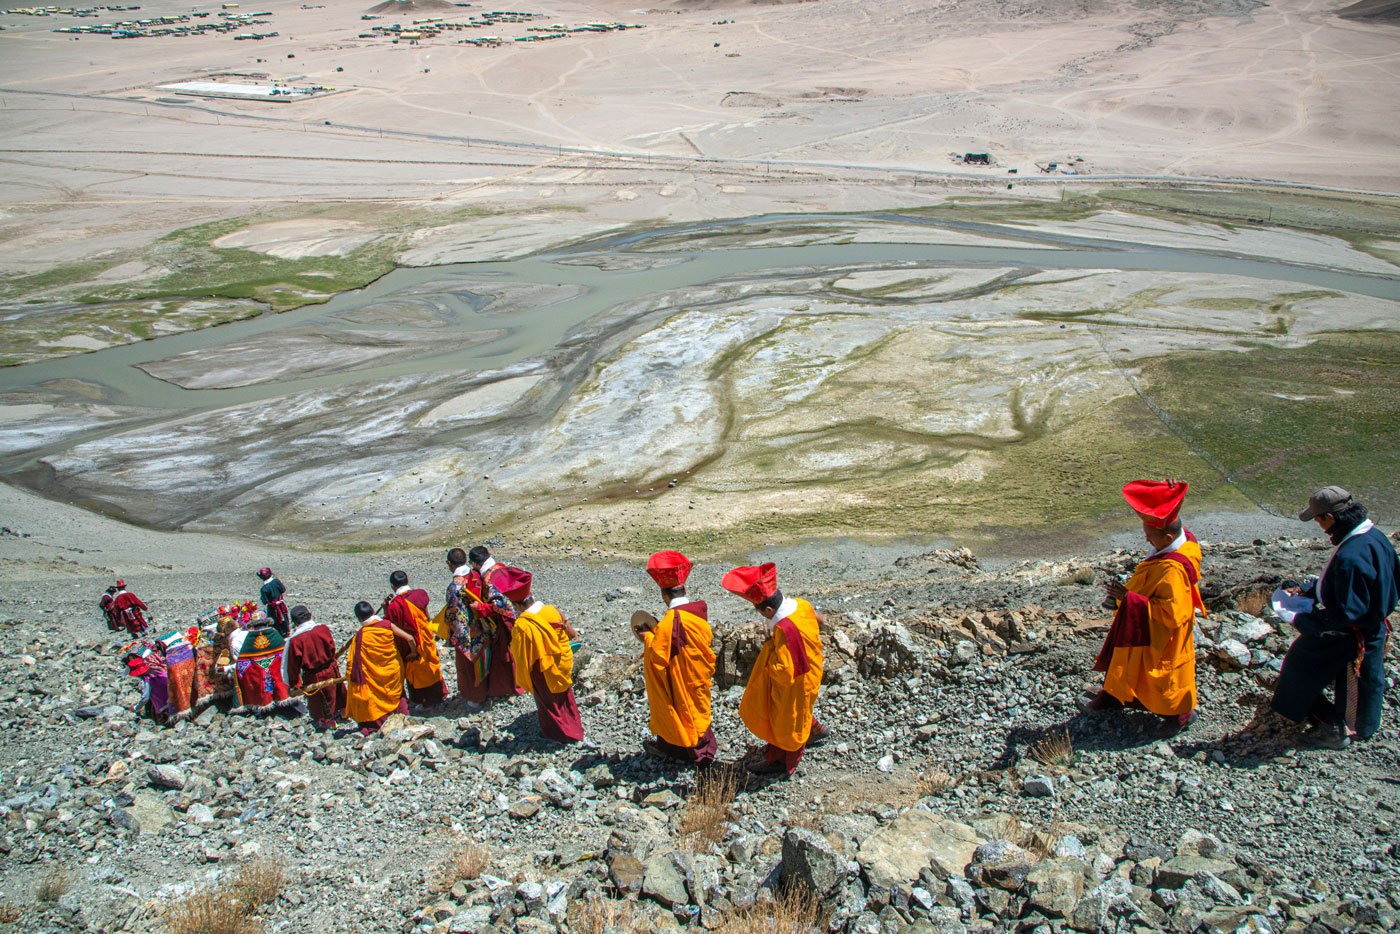 The lamas descend the steep slopes into the Hanle valley as the procession continues